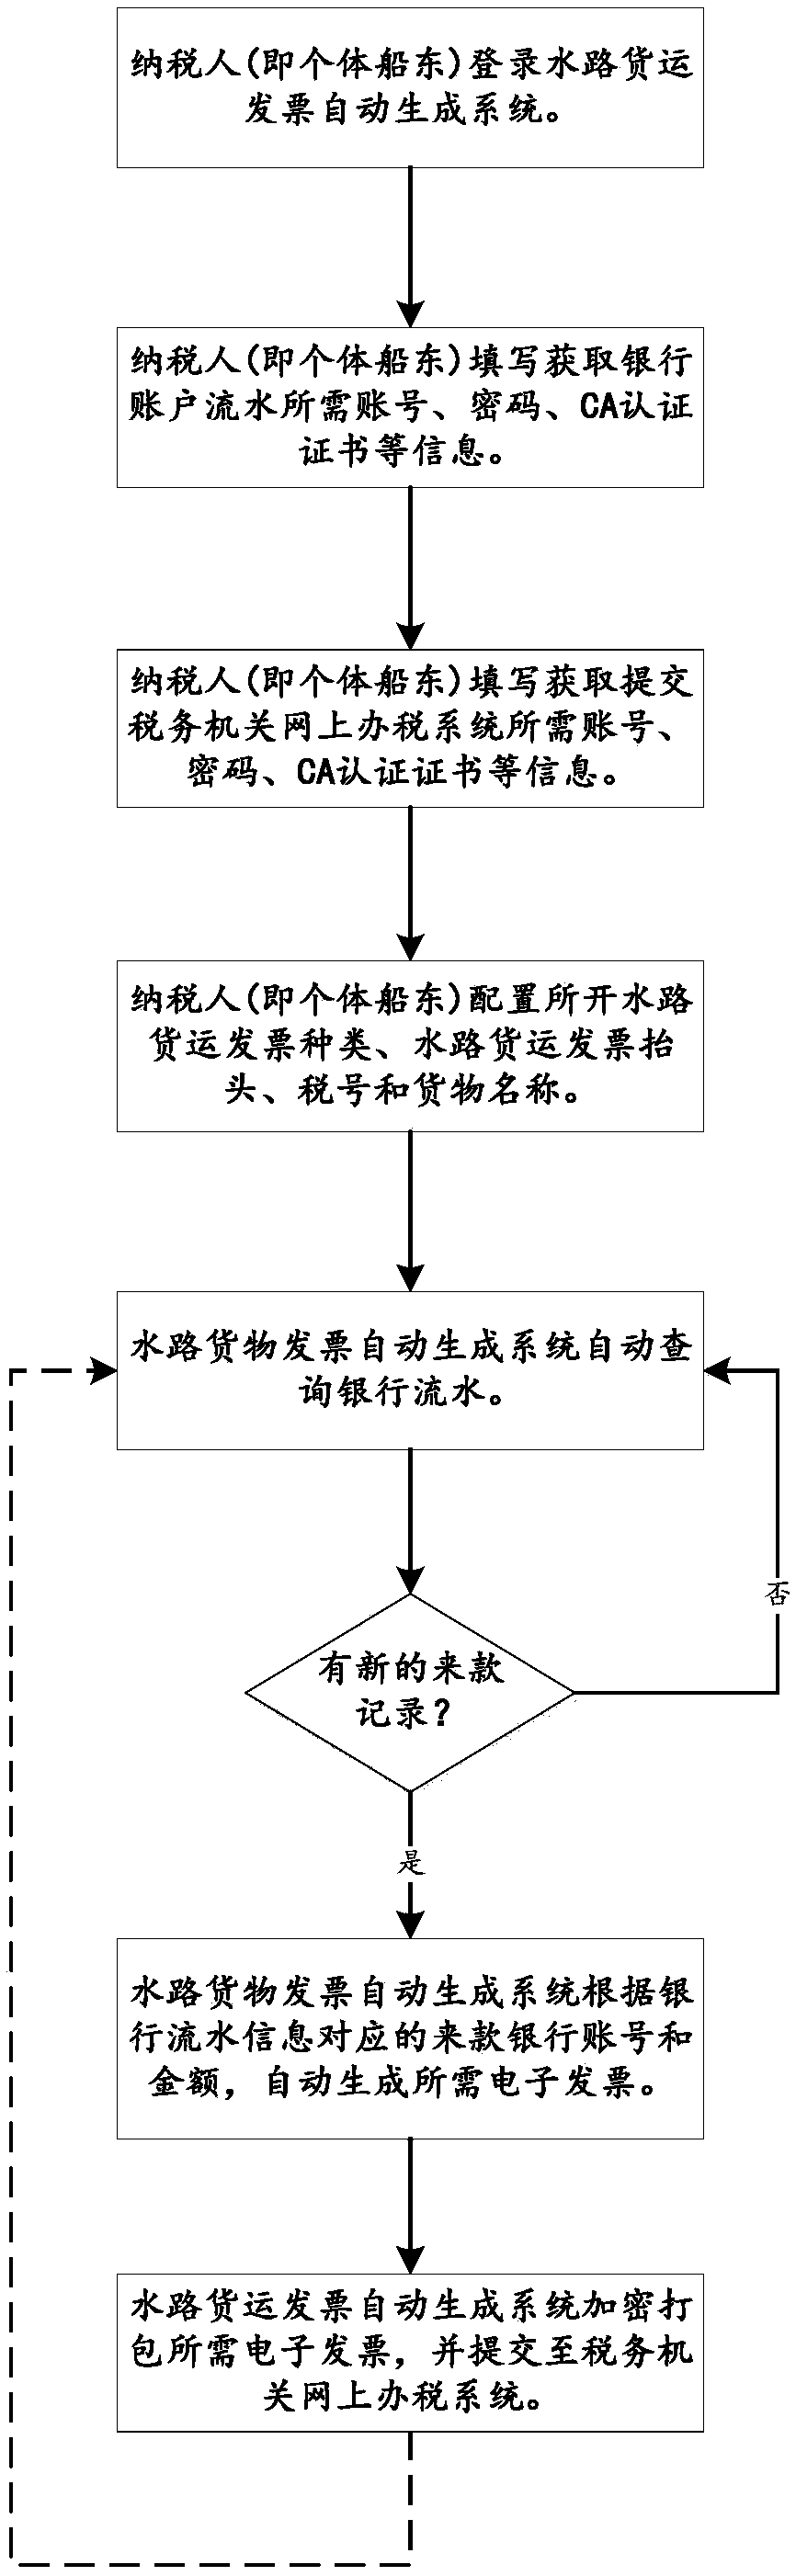 Waterway freight invoice automatic generation system and method based on bank account